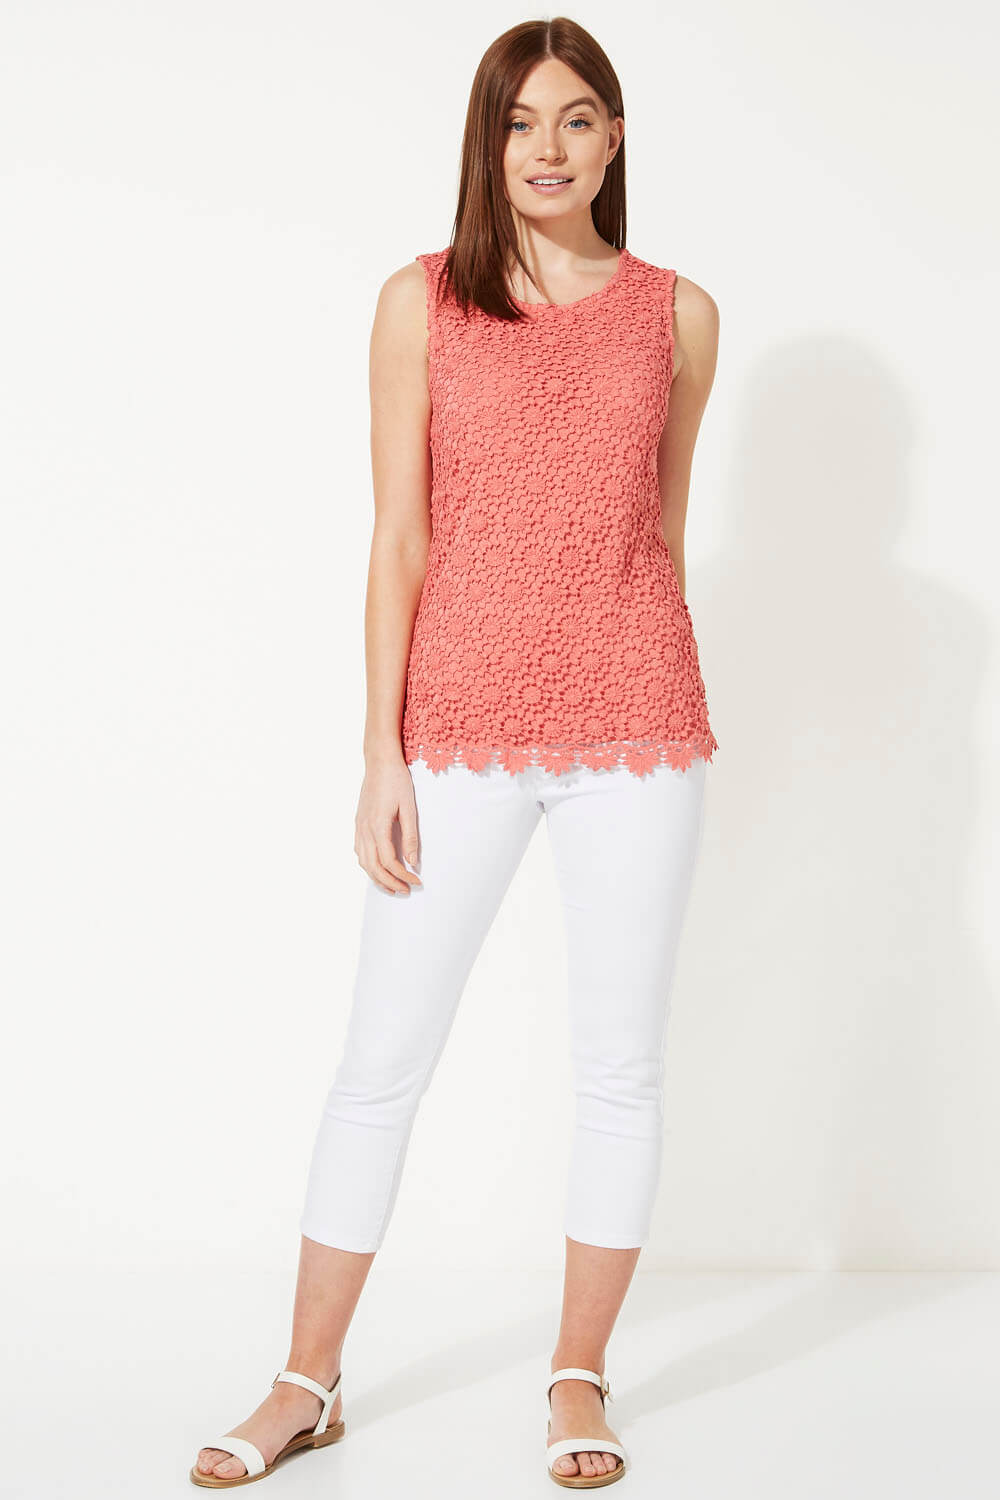 Rose Lace Front Jersey Vest Top, Image 2 of 4